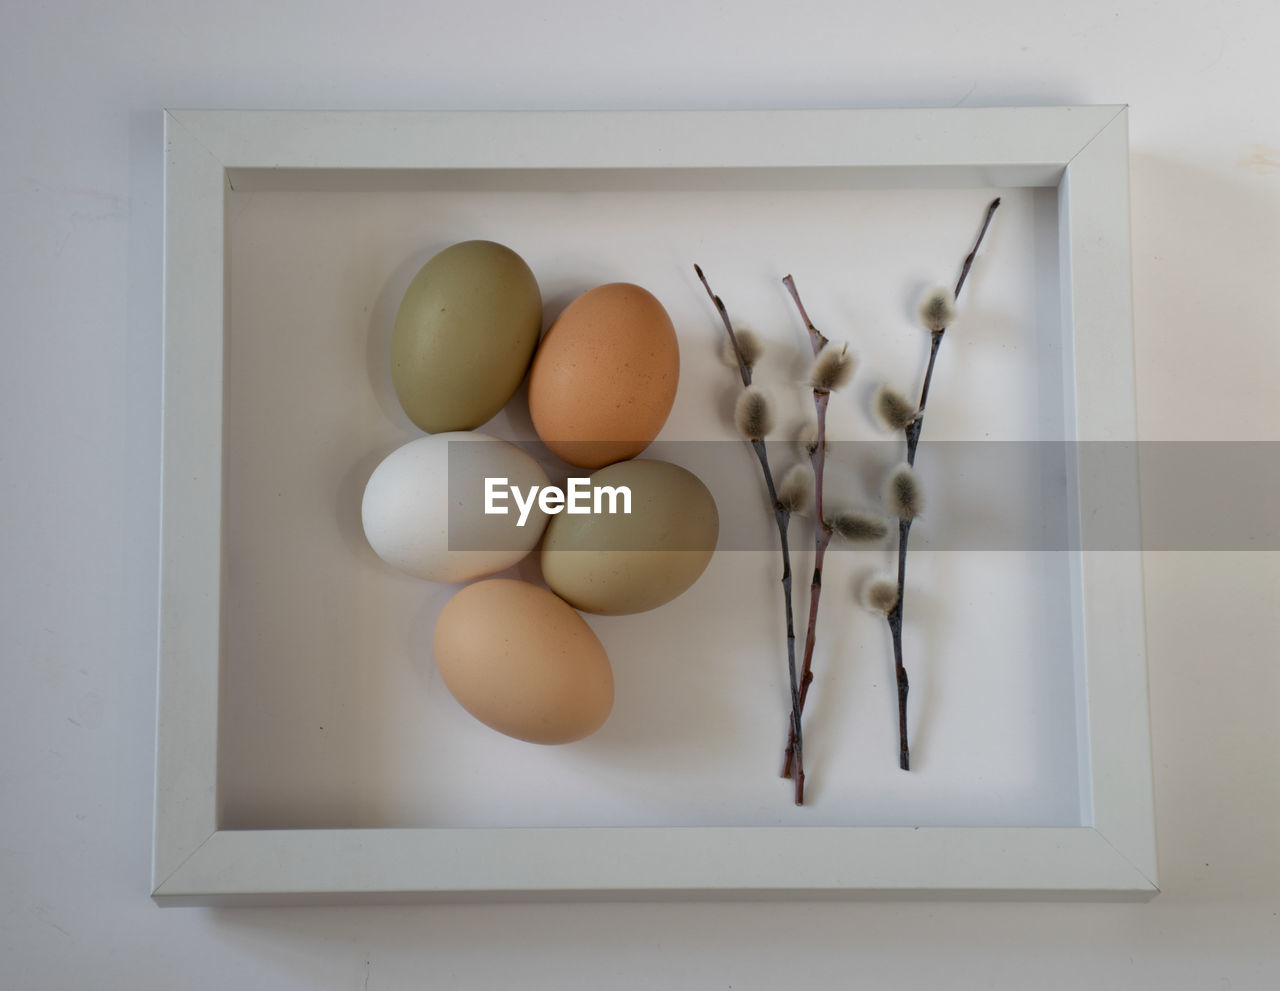 egg, food, food and drink, indoors, wellbeing, freshness, no people, healthy eating, fragility, studio shot, still life, group of objects, raw food, medium group of objects, animal egg, simplicity, directly above, white, high angle view, table, brown, shell, nature, ingredient, wood